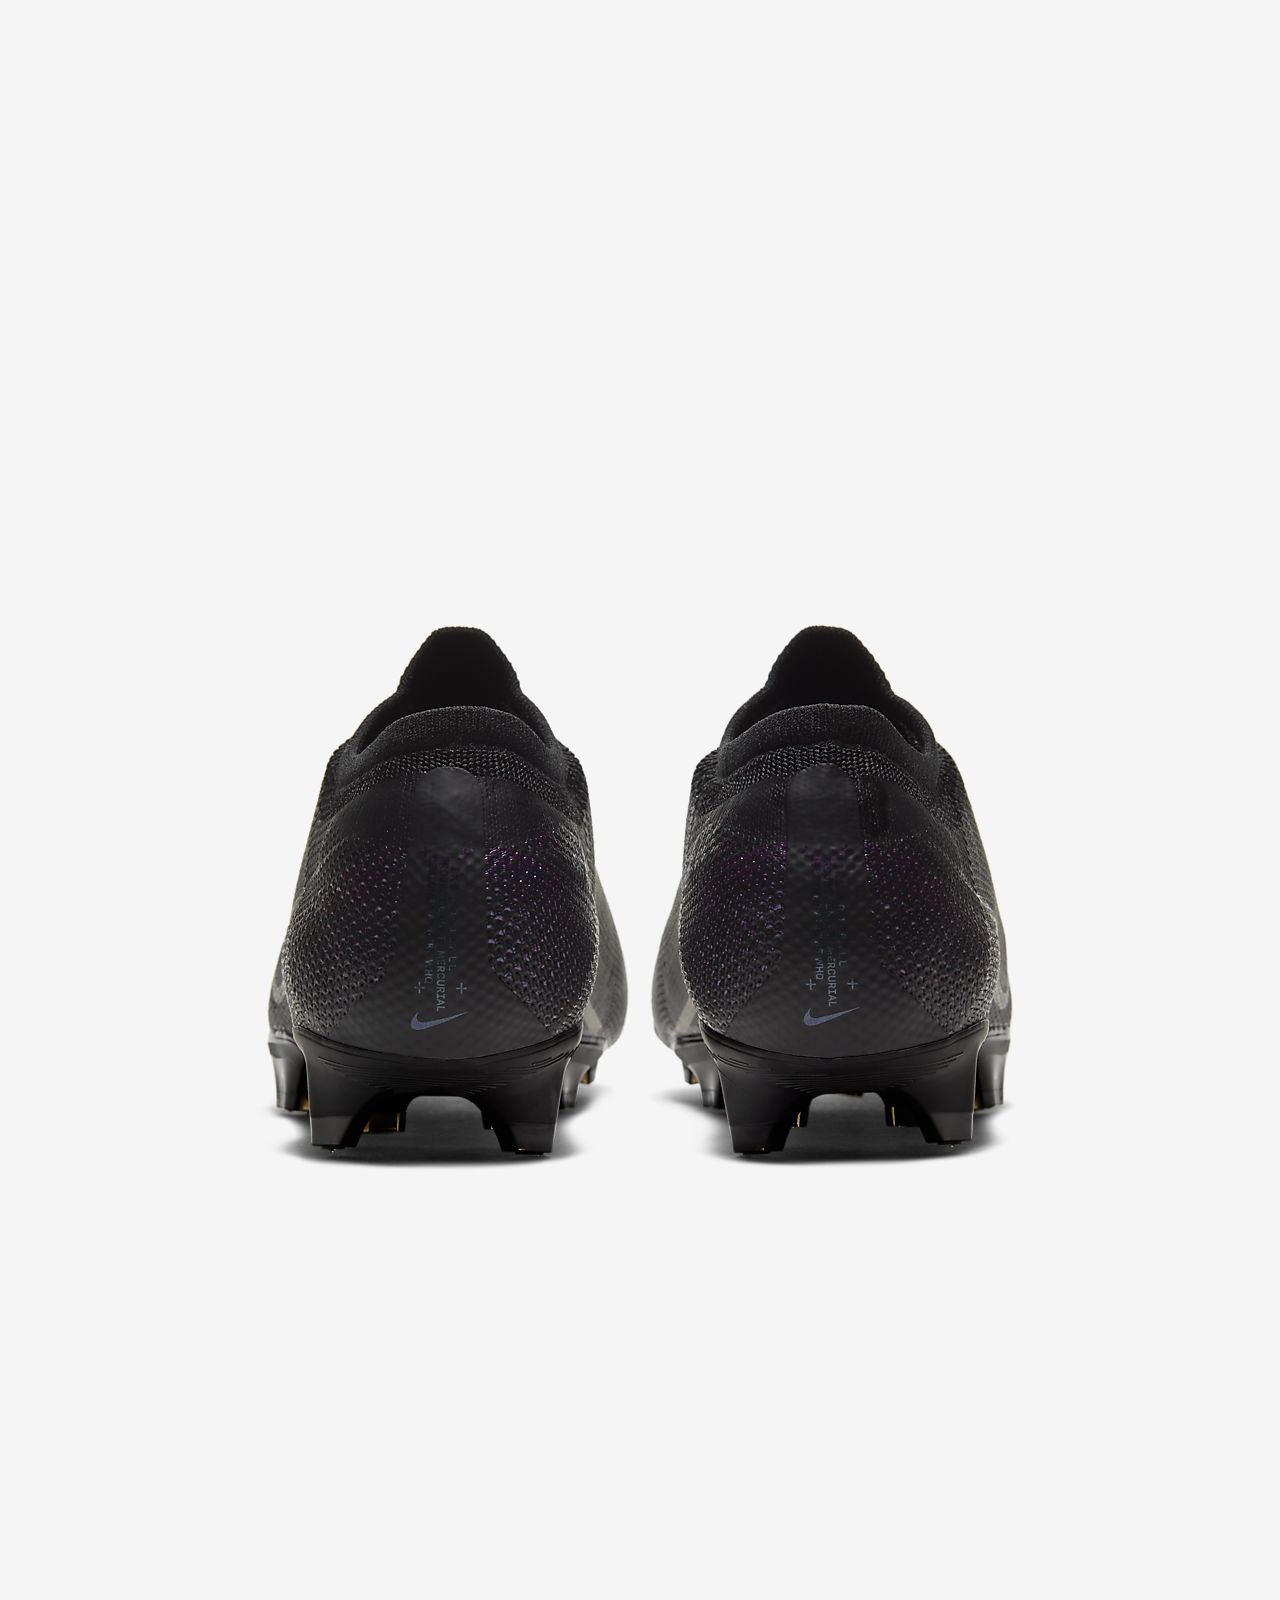 Nike Mercurial Vapor XIII Club SG Black buy and offers on.